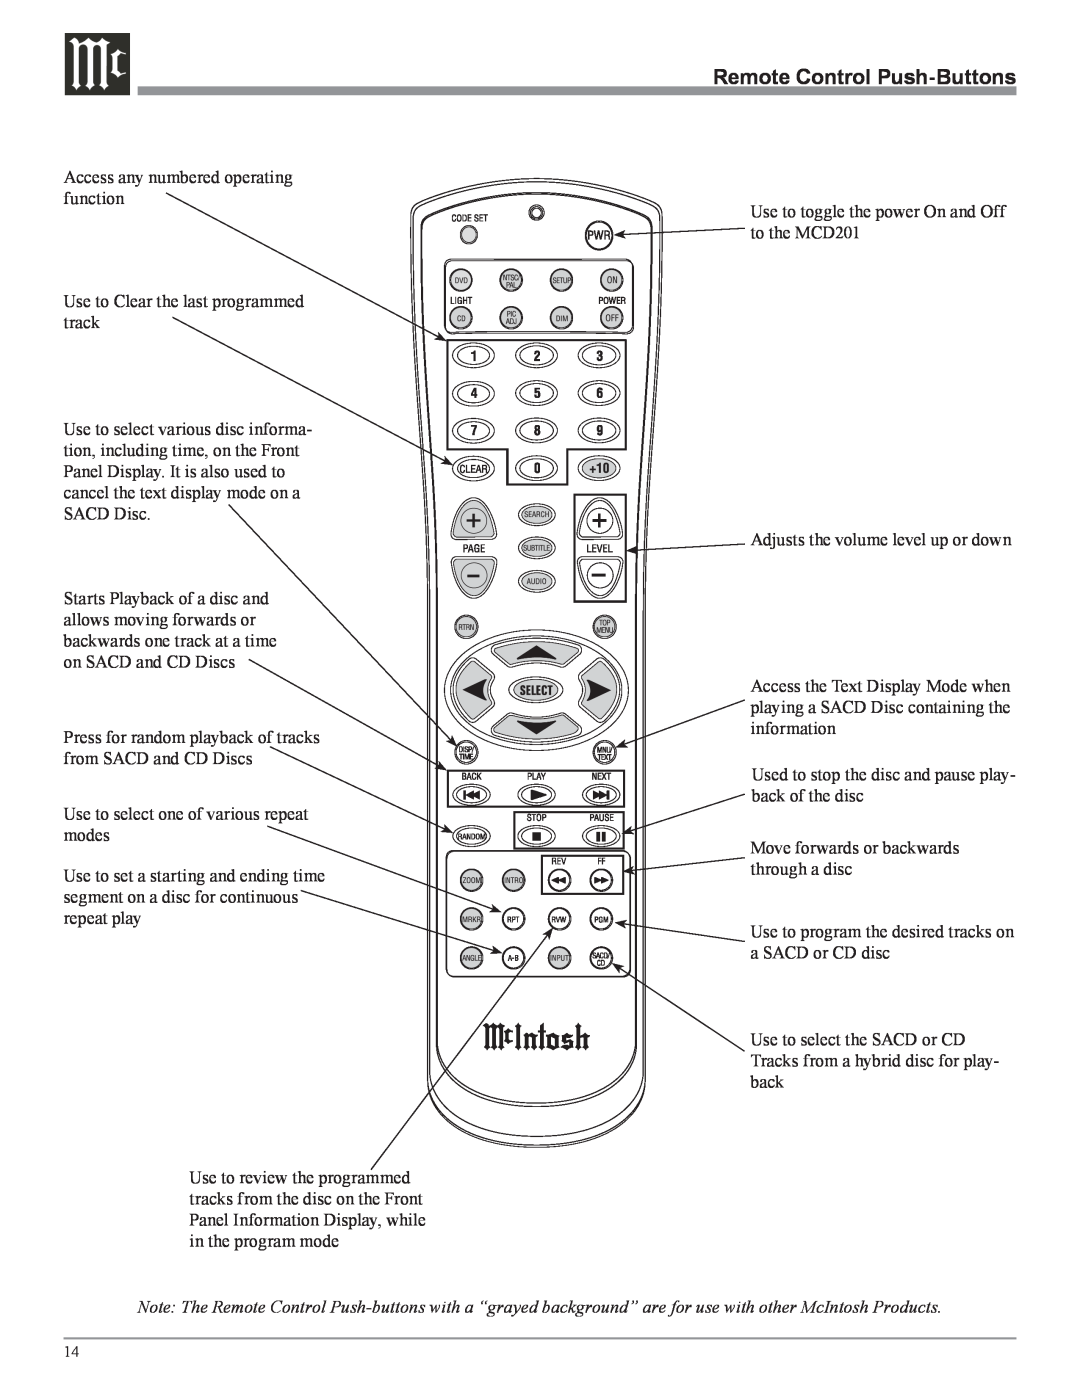 McIntosh MCD201 owner manual Remote Control Push-Buttons 